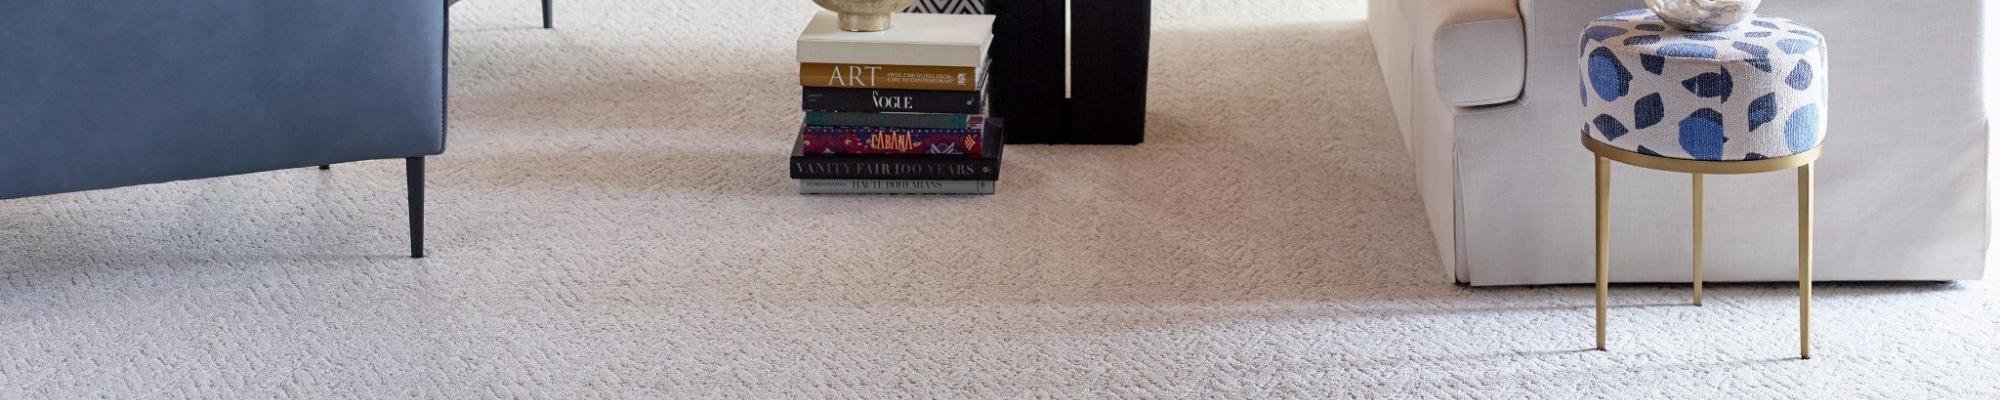 Books on carpets from Carpet Mill Discounters Inc in Timonium